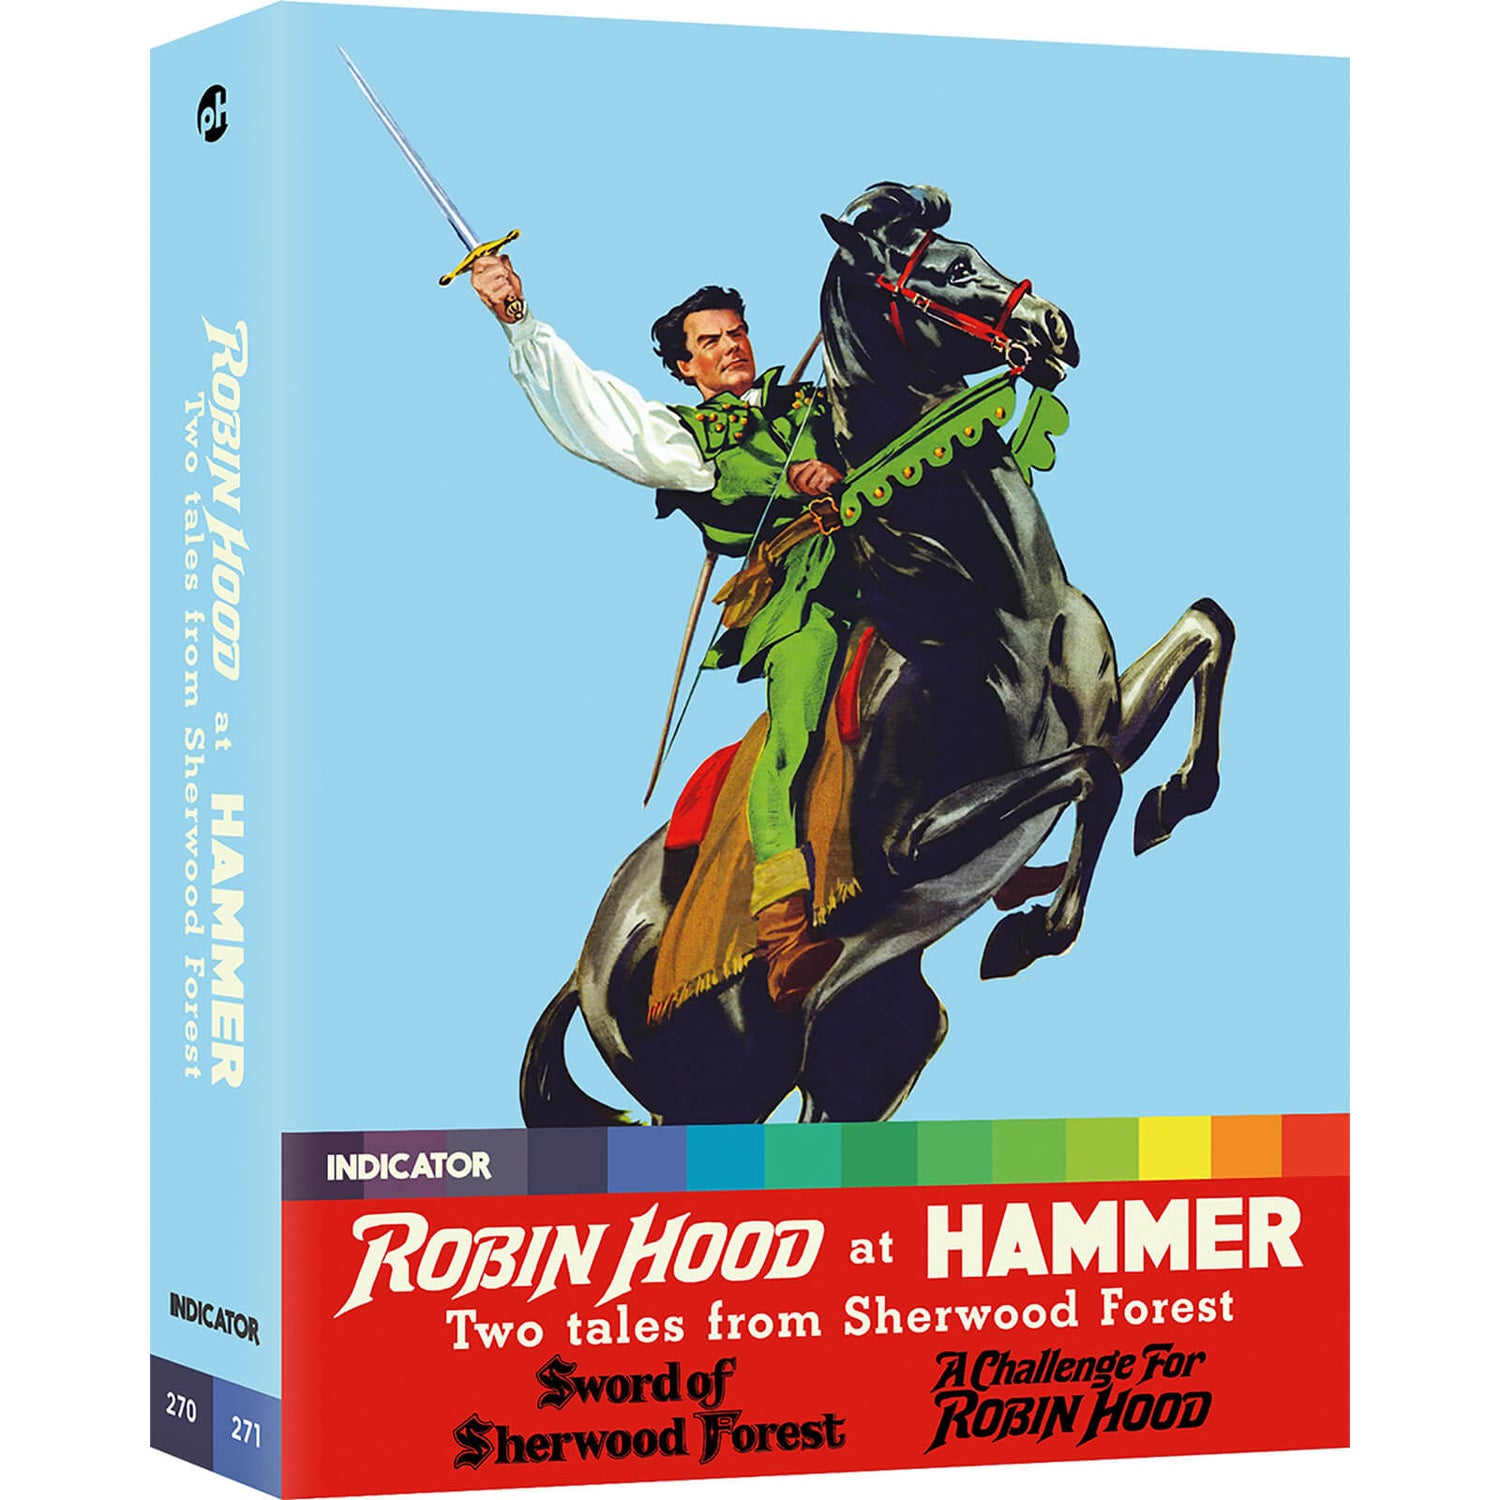 Robin Hood at Hammer: Two Tales from Sherwood Forest (Limited Edition)